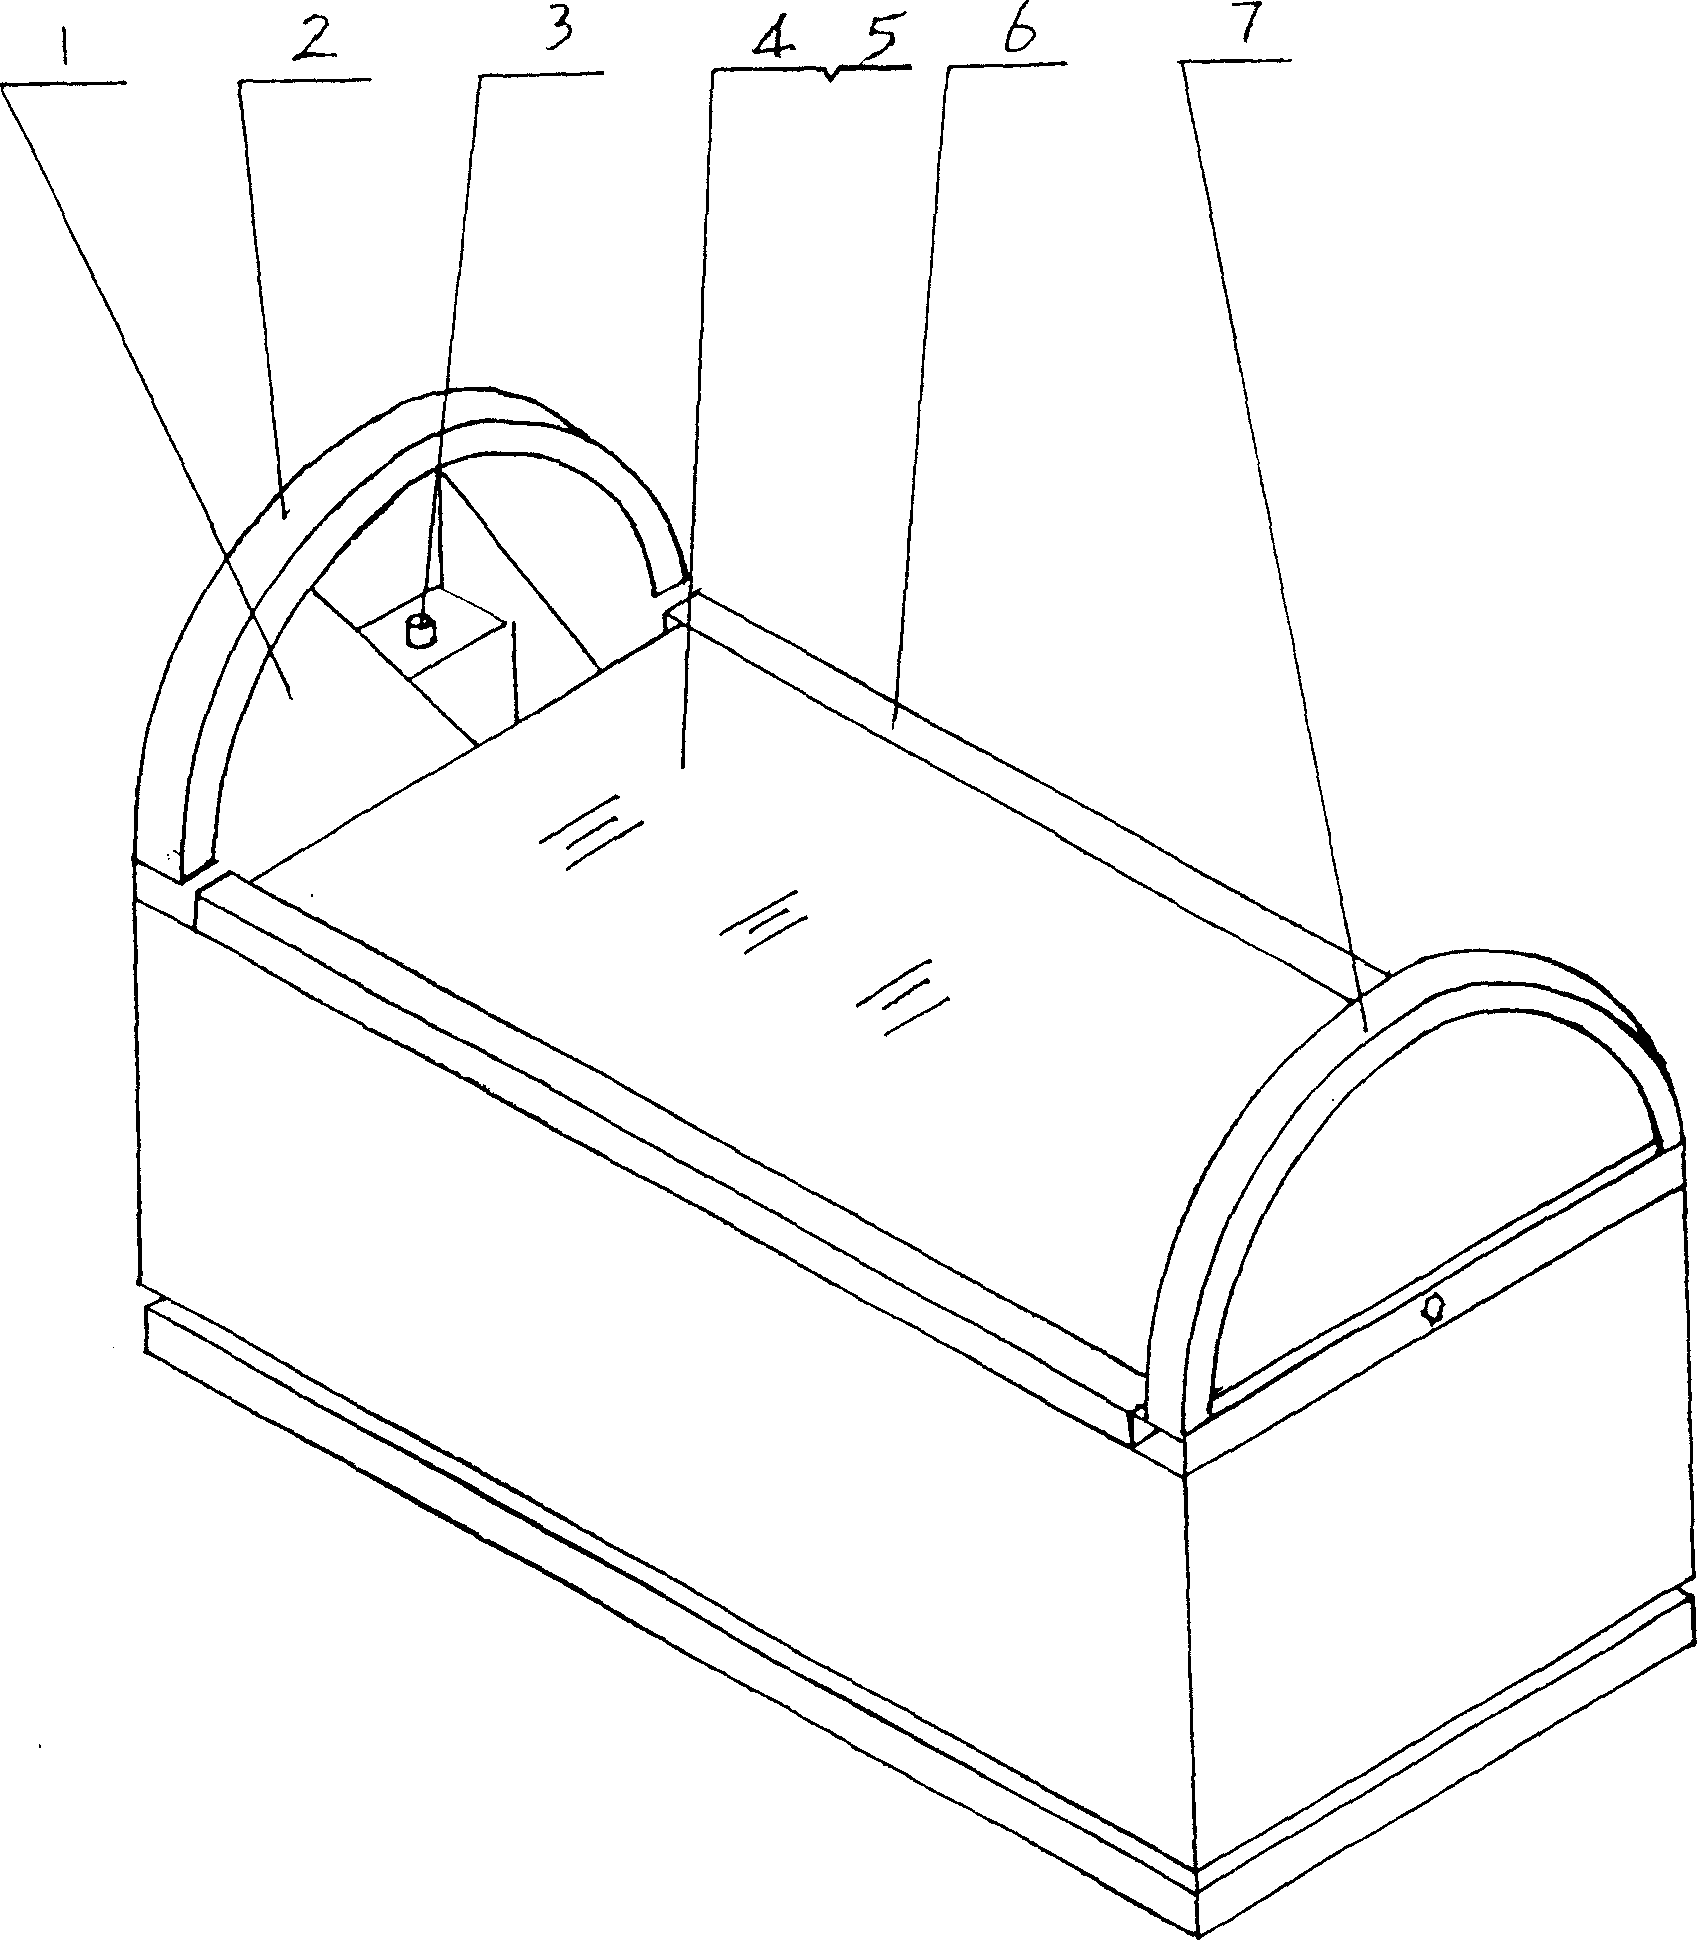 Fall-automatic earthquake resistance safe bed